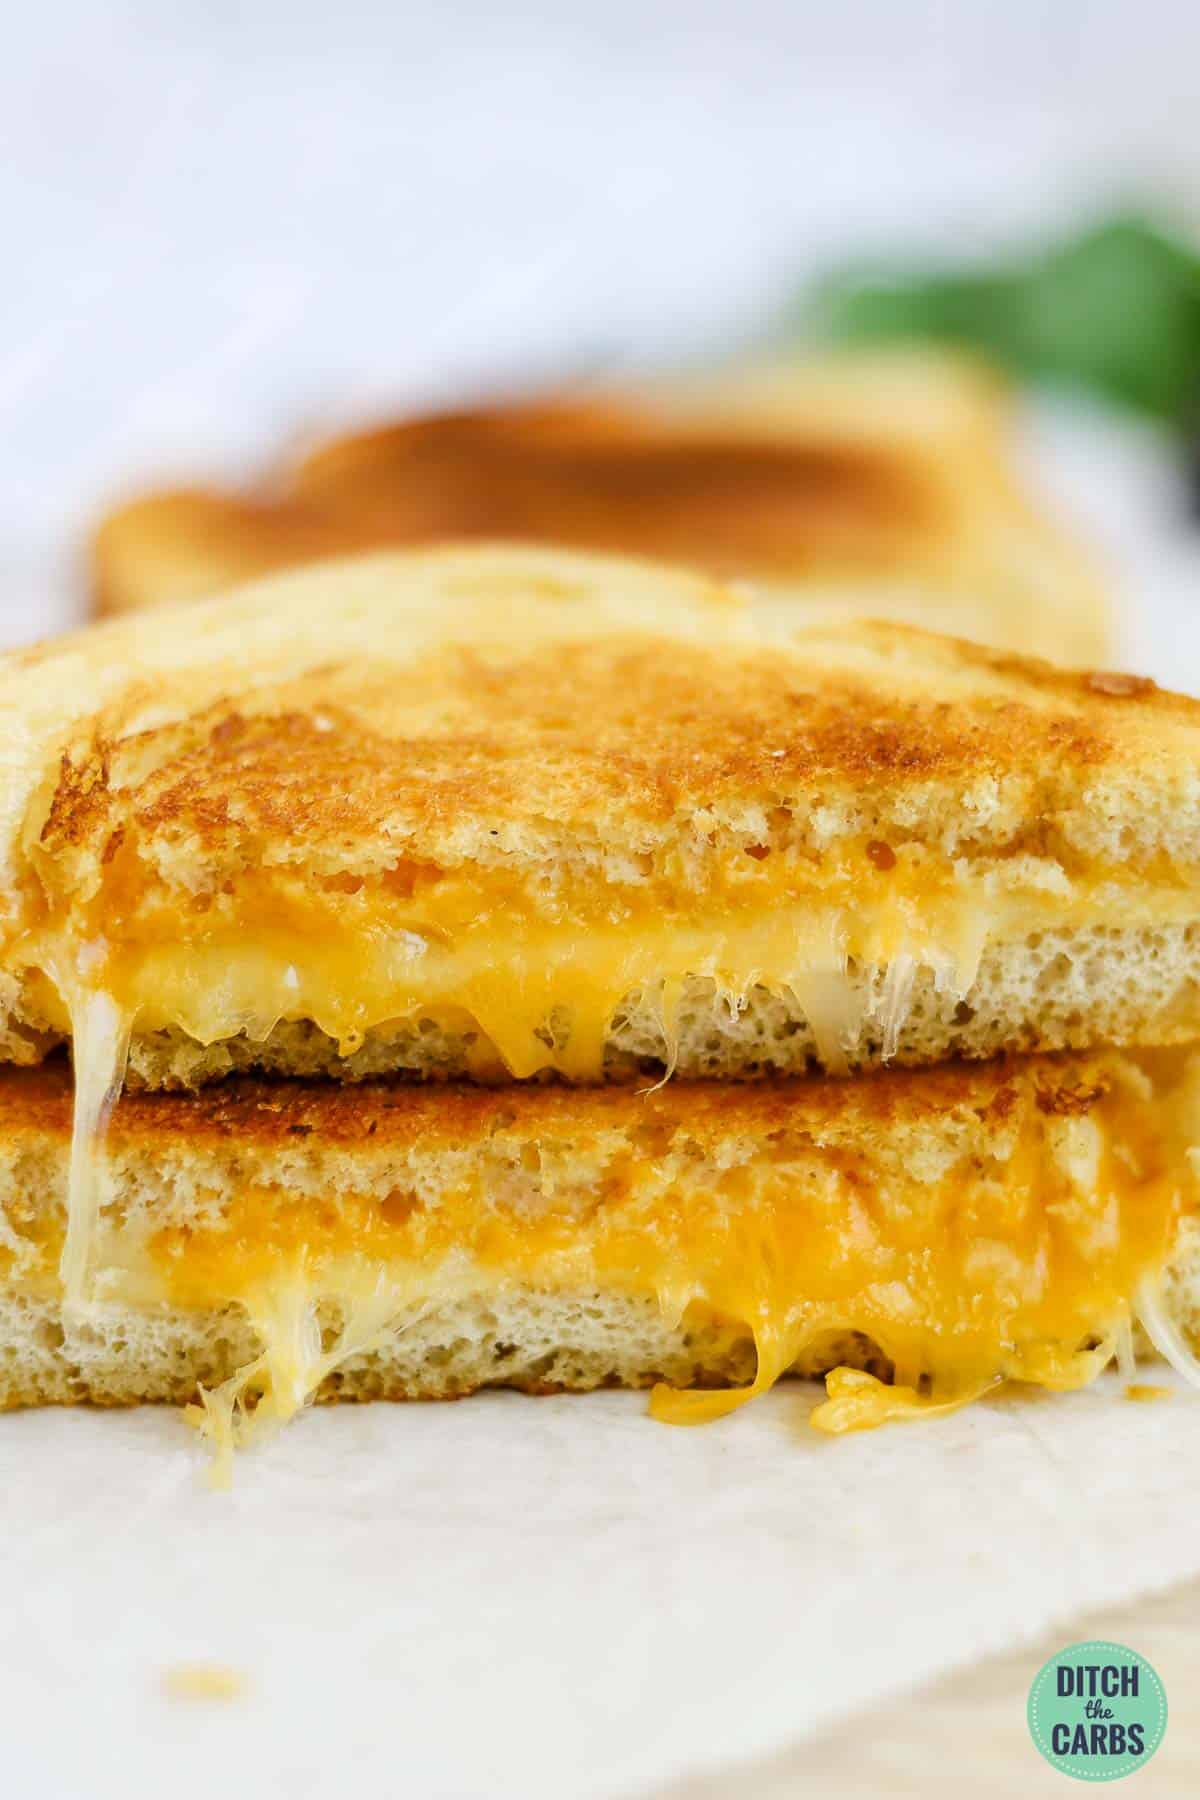 A keto grilled cheese sandwich cut in half and stacked on top of each other.